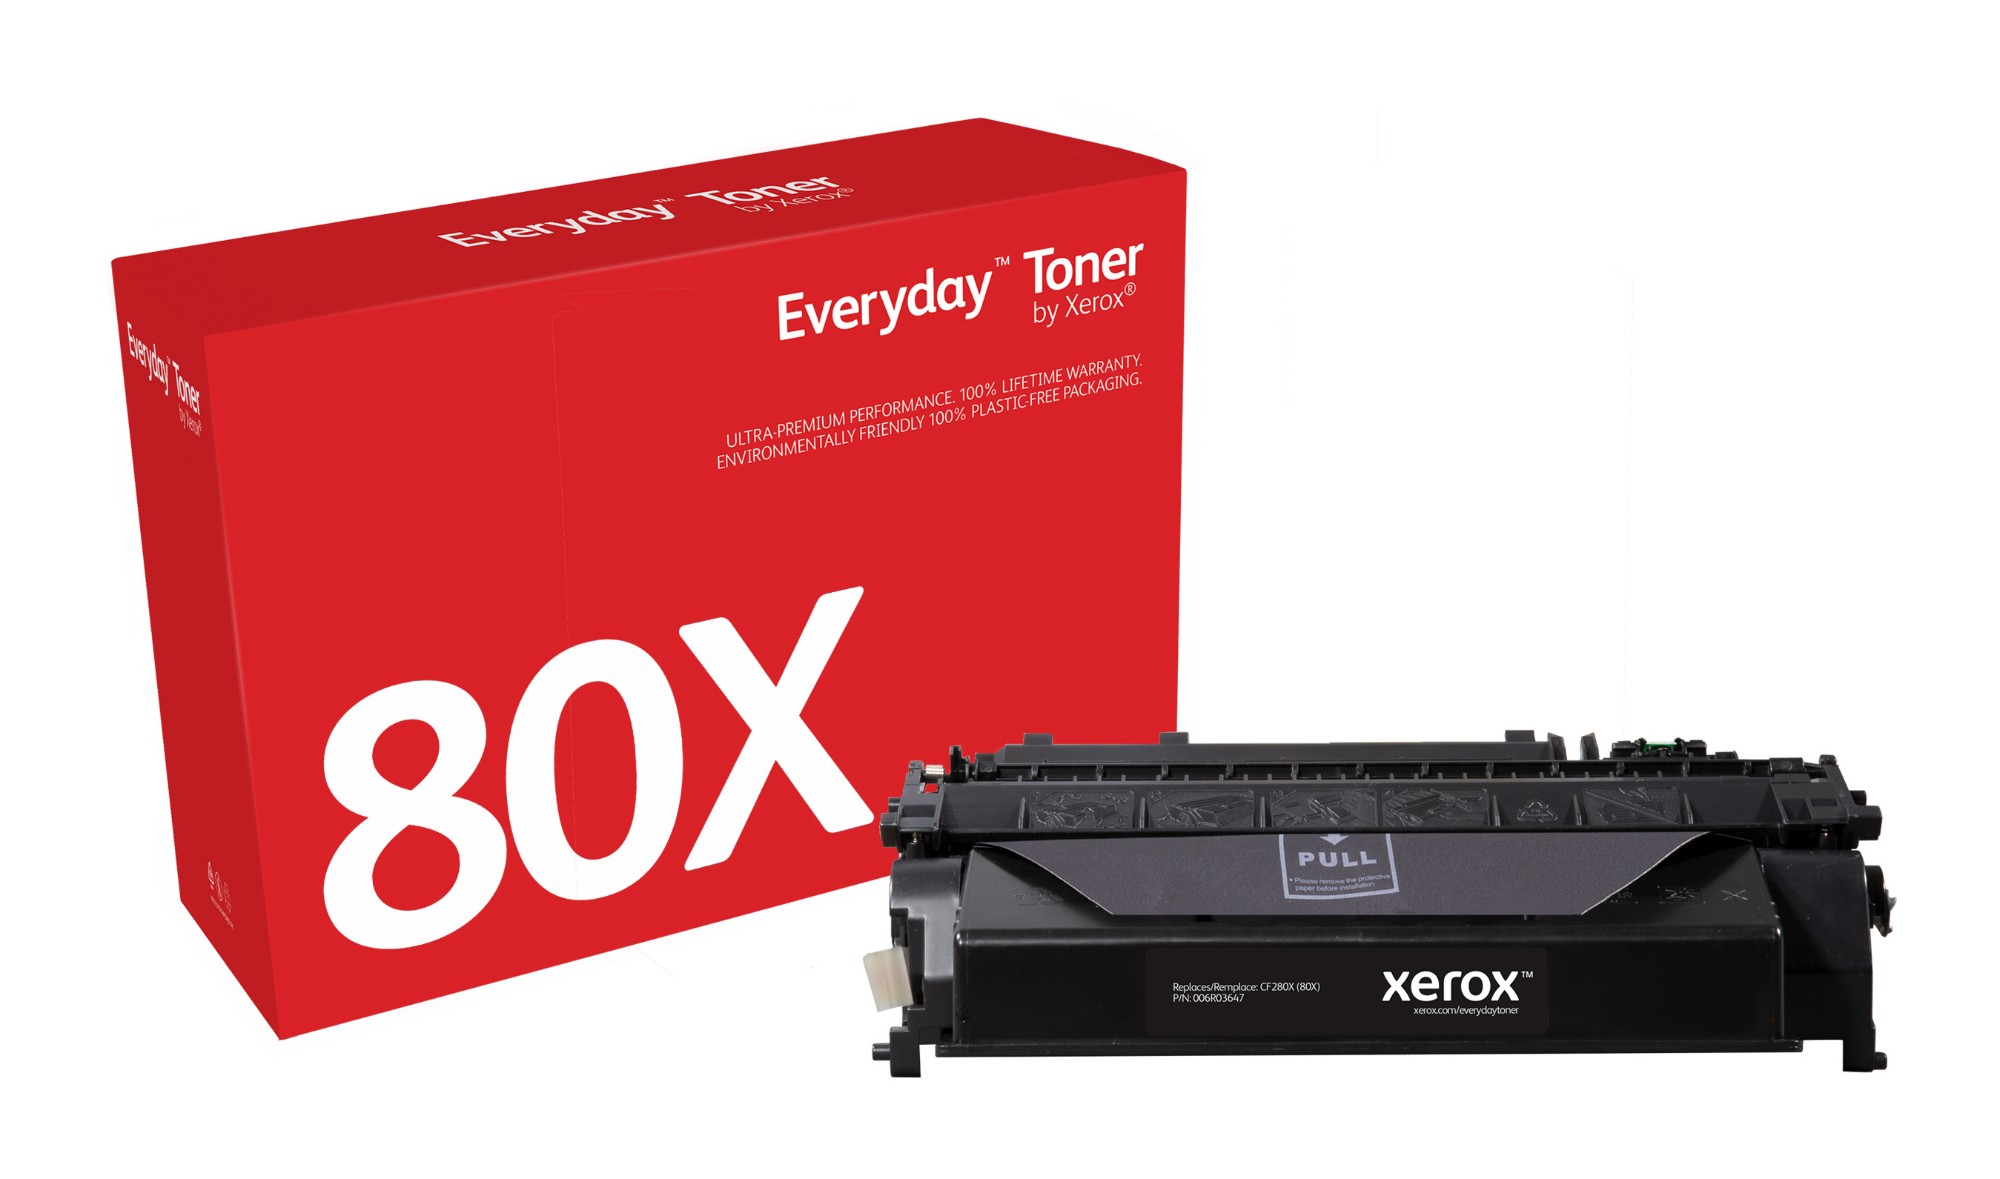 Xerox 006R03647 Toner cartridge black, 11.5K pages (replaces HP 80X/CF280X) for HP Pro 400